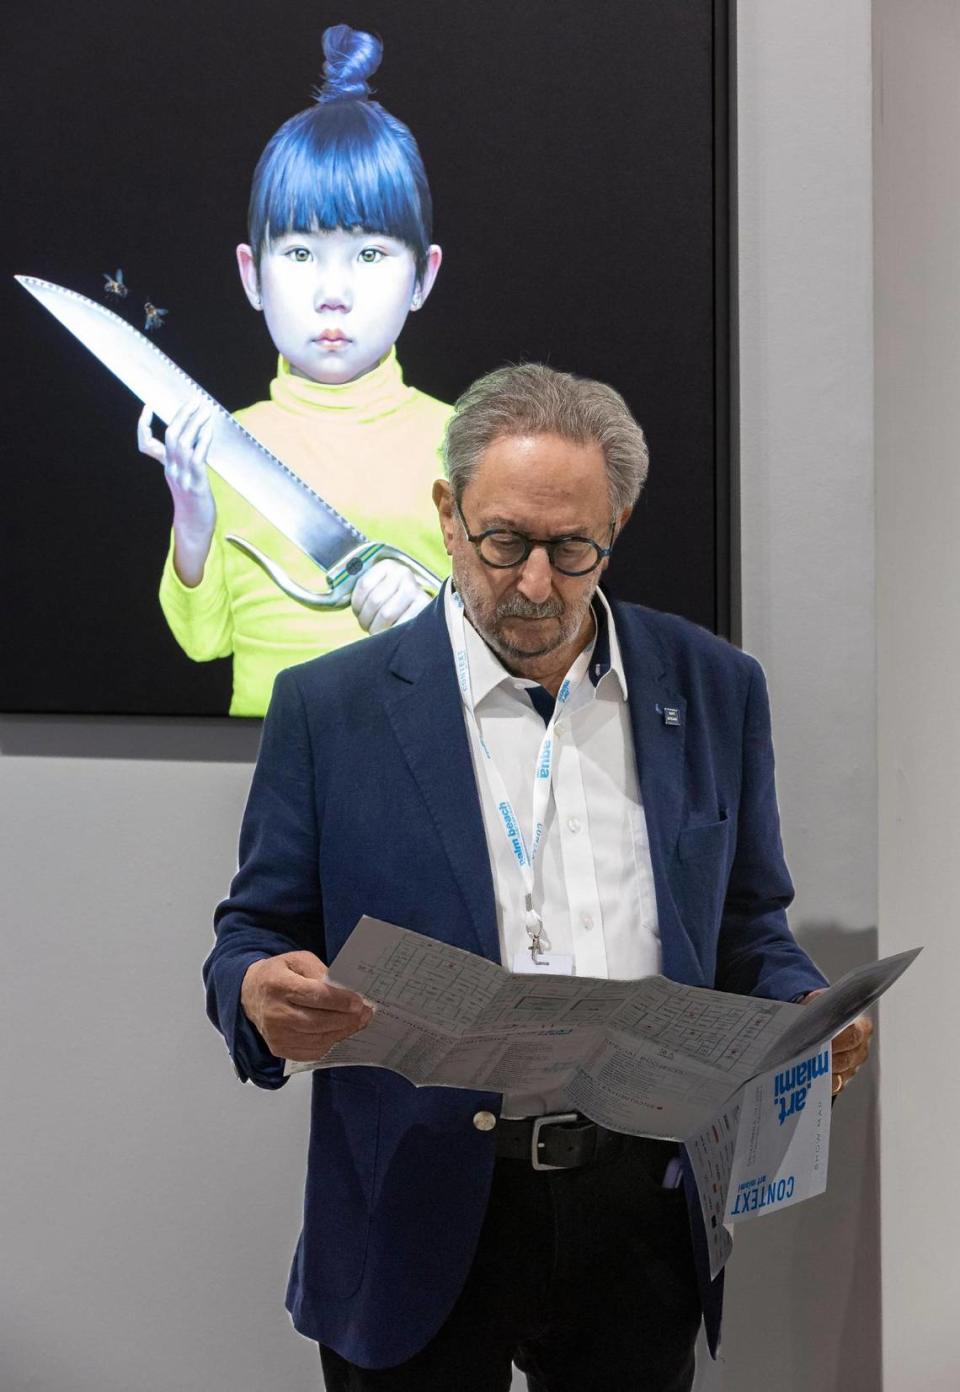 Raymond S. Elman looks at show floor map next to Salustiano’s “Tenderness Land” during a VIP preview at Art Miami 2023 on Tuesday, Dec. 5, 2023, in downtown Miami, Fla. MATIAS J. OCNER/mocner@miamiherald.com